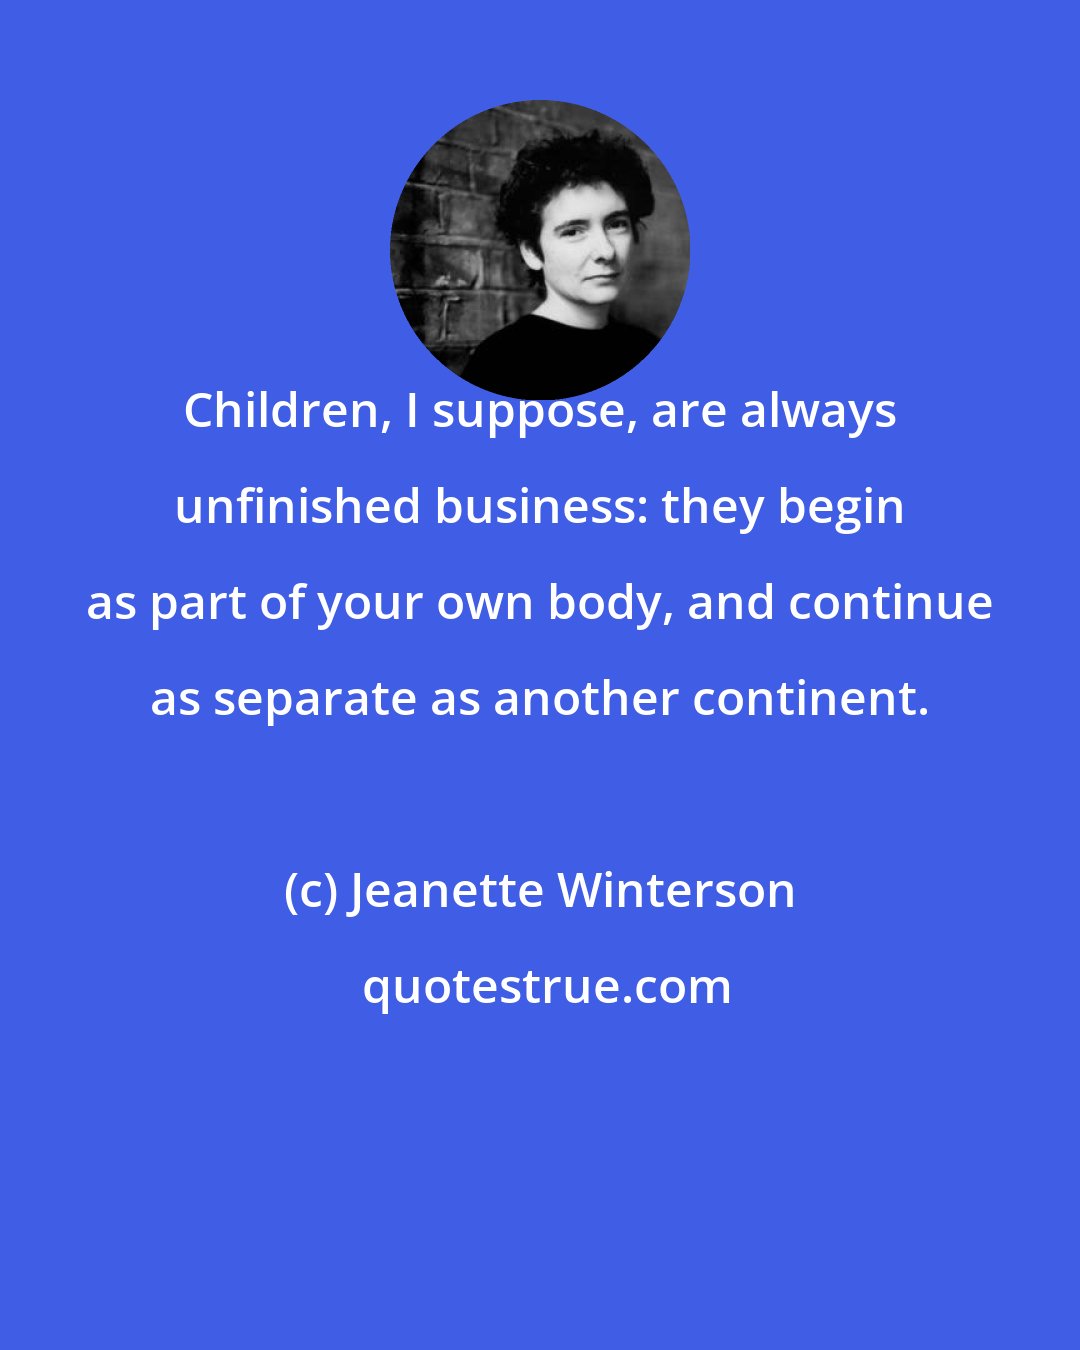 Jeanette Winterson: Children, I suppose, are always unfinished business: they begin as part of your own body, and continue as separate as another continent.